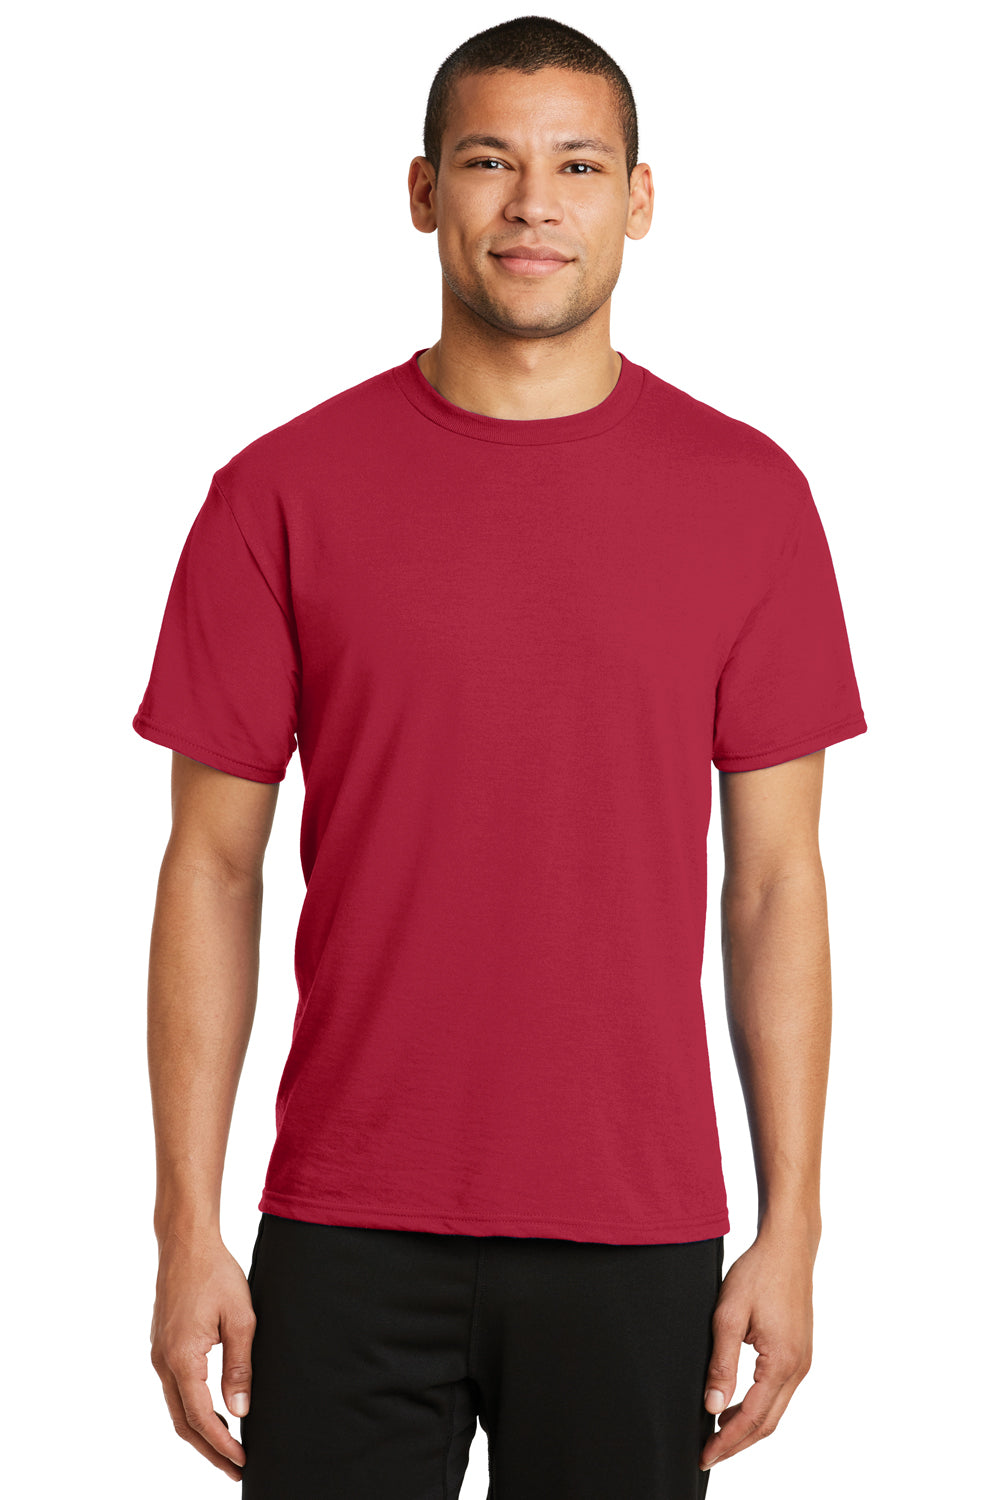 Port & Company PC381 Mens Dry Zone Performance Moisture Wicking Short Sleeve Crewneck T-Shirt Red Front